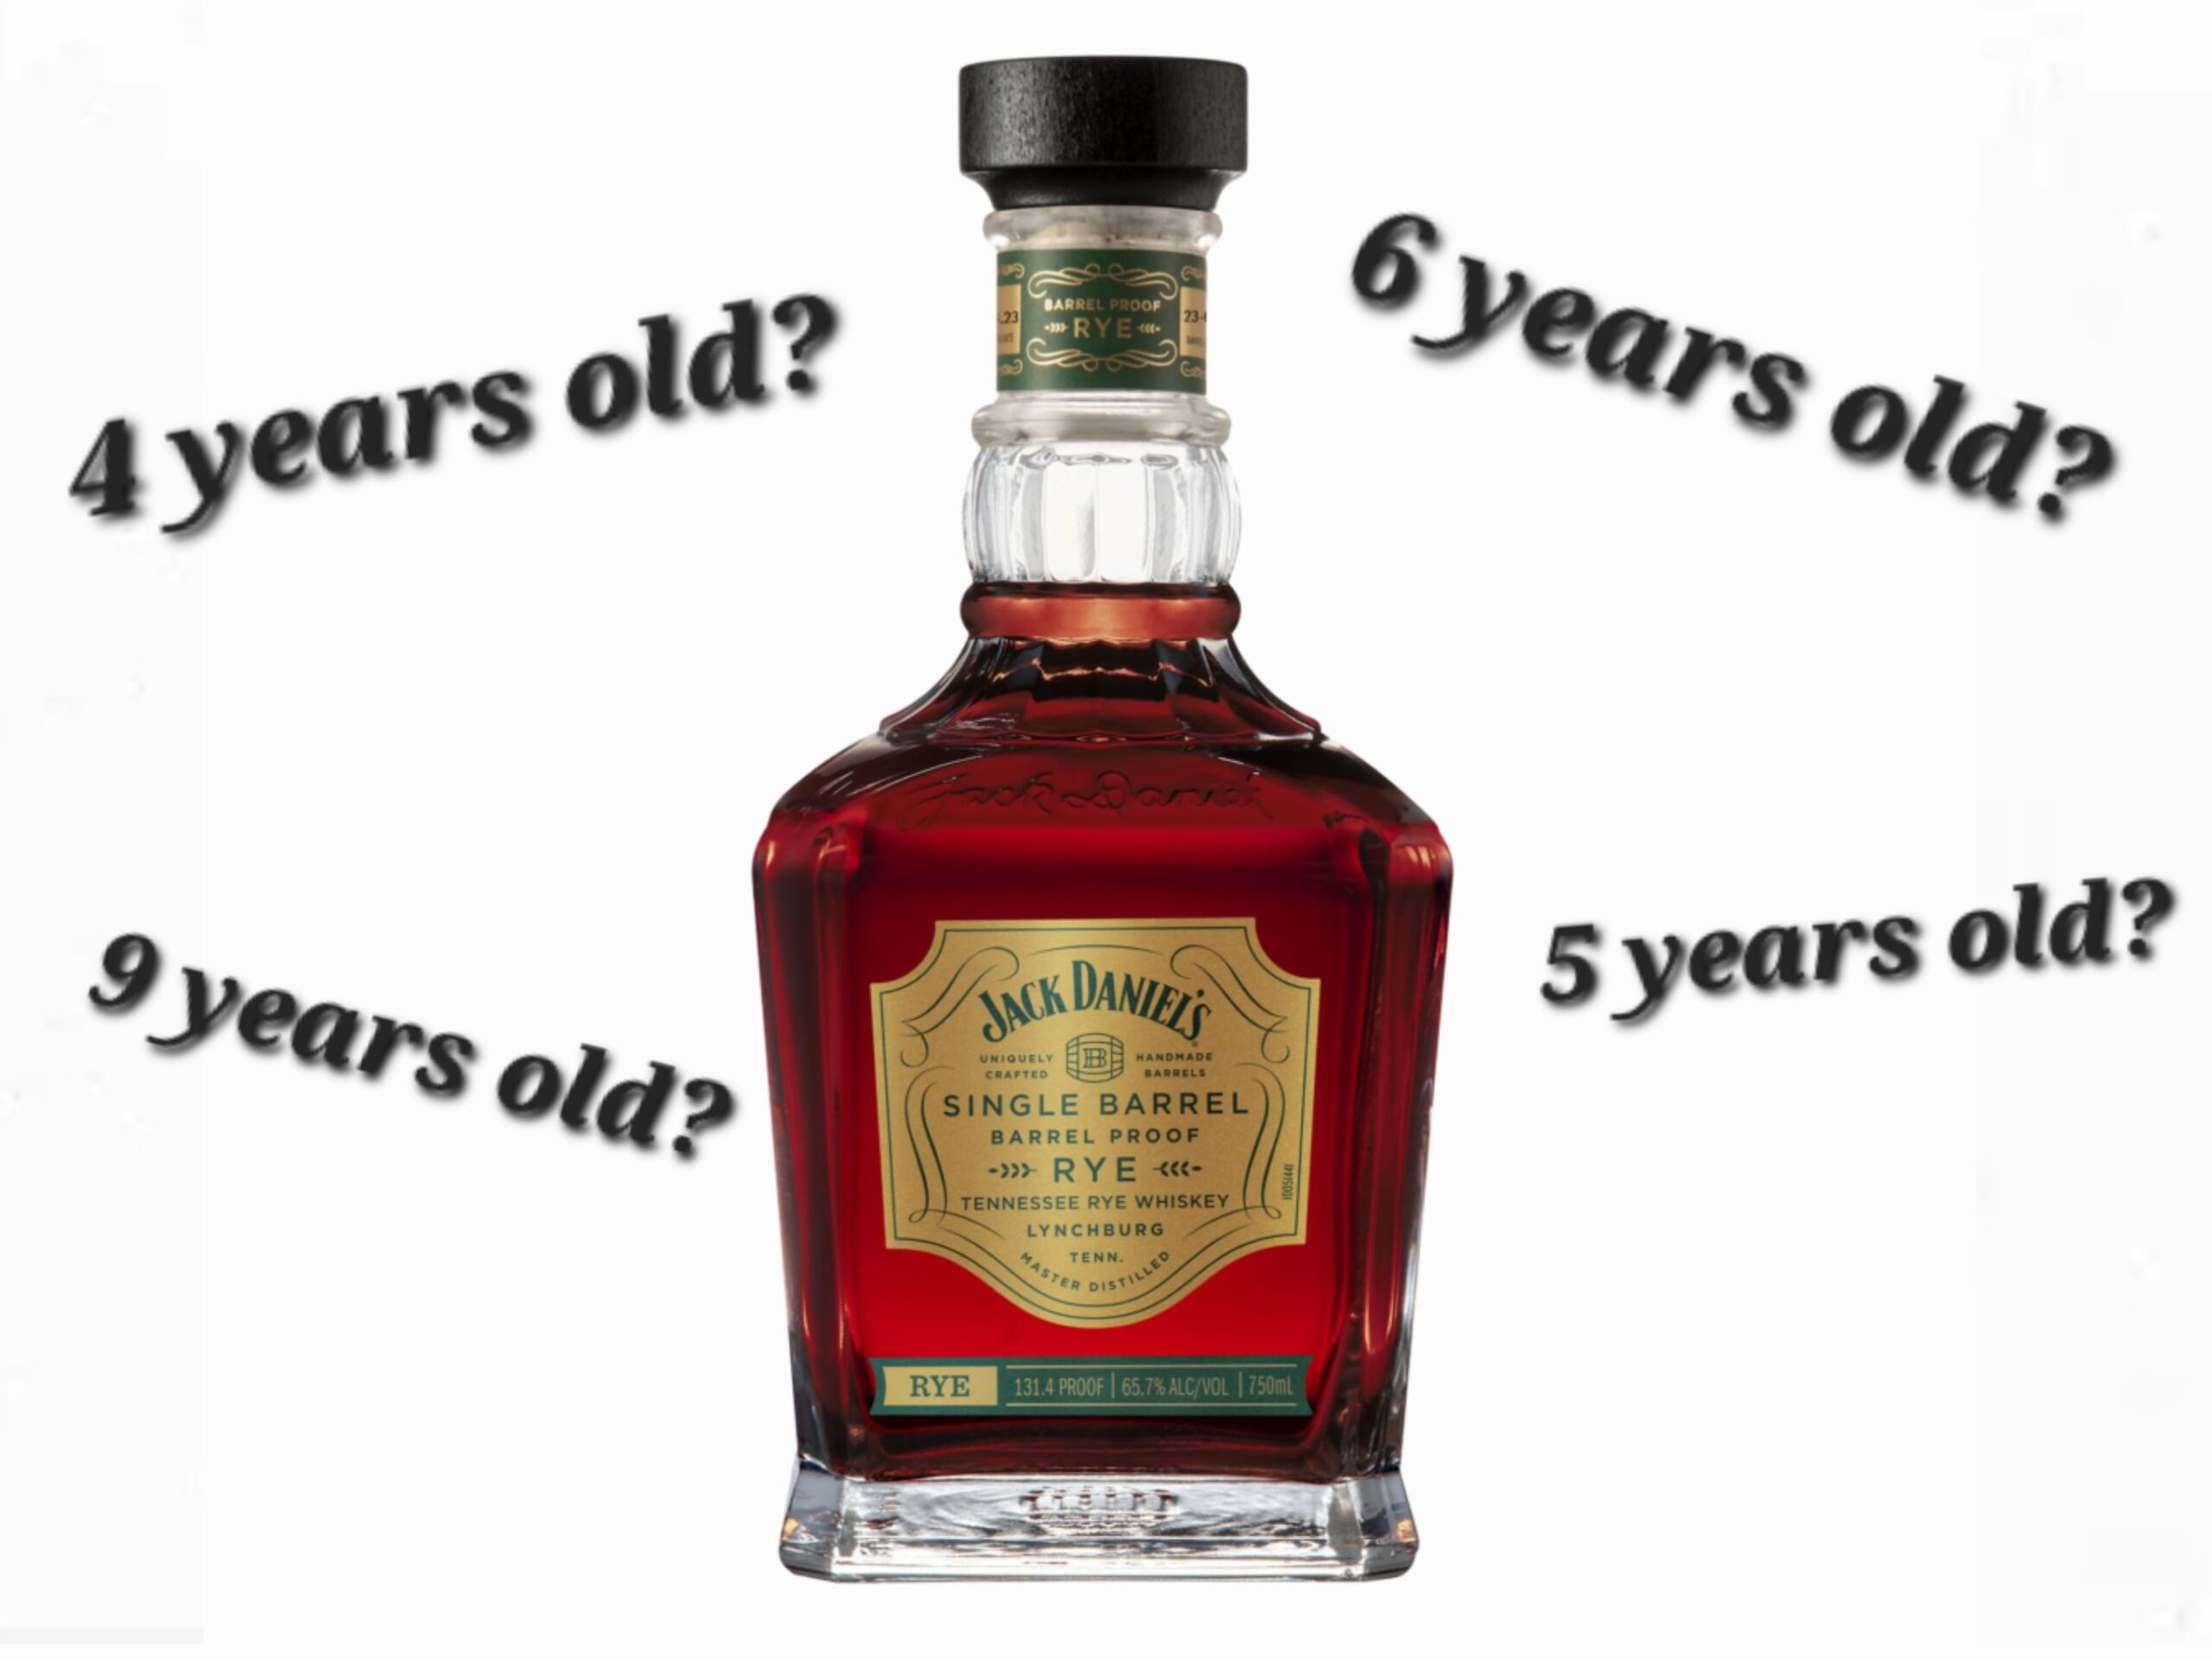 Just how old are the new Jack Daniel’s Barrel Proof Rye Whiskey Single Barrels?